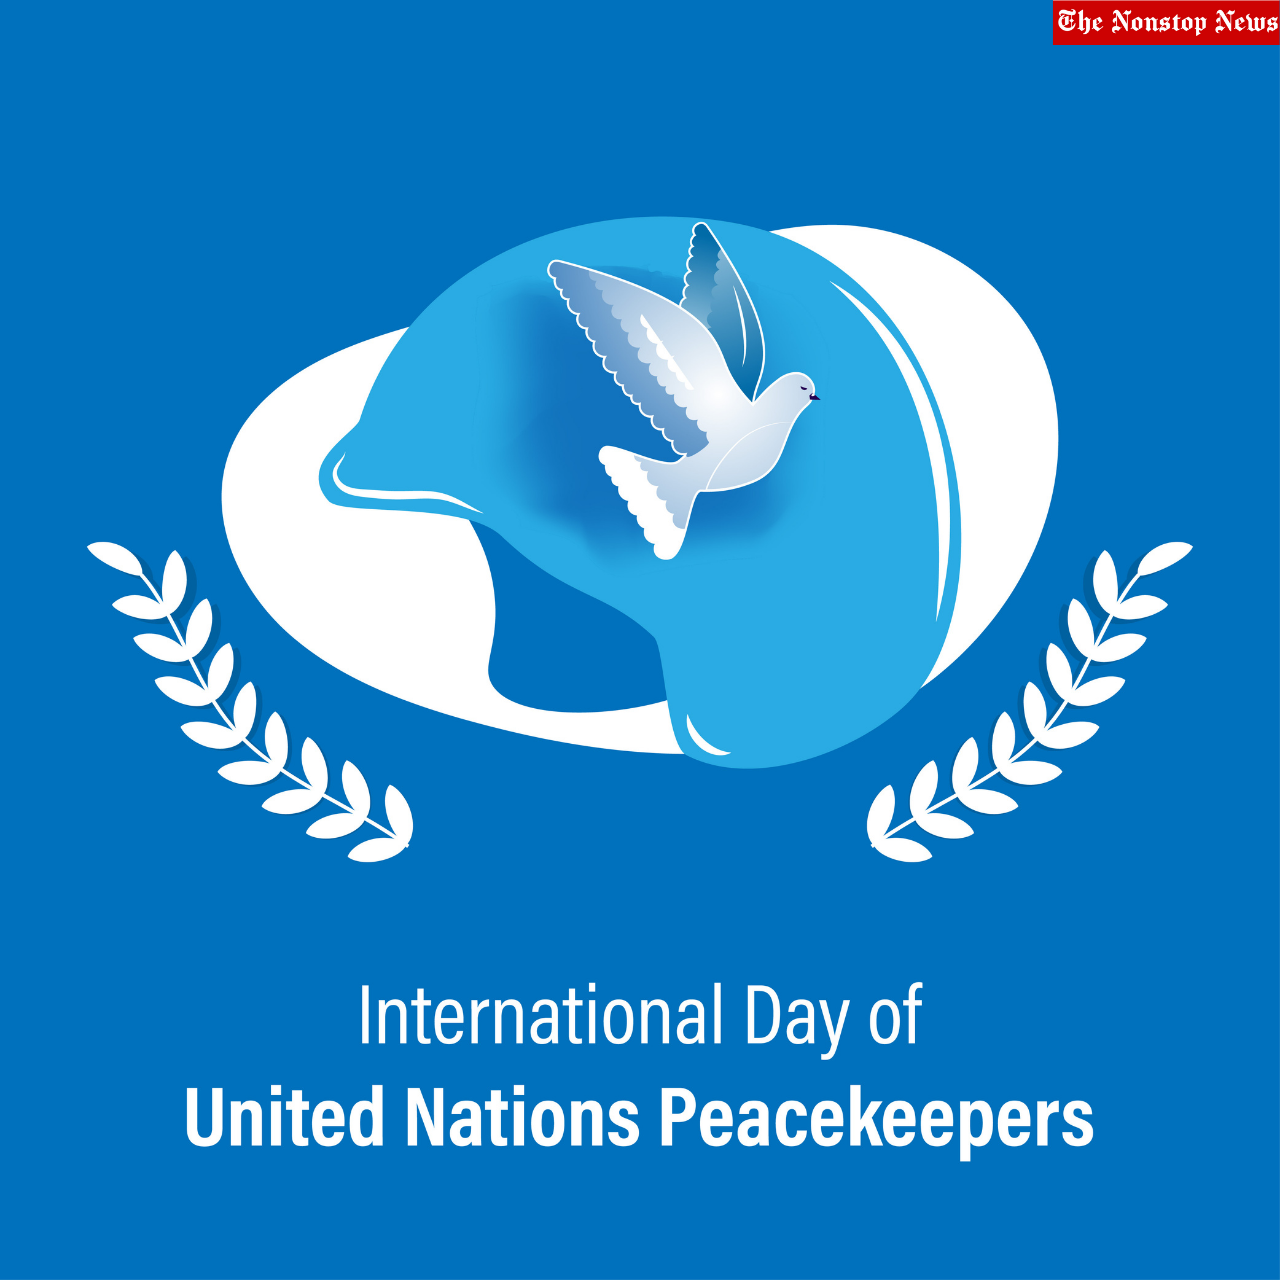 International Day of United Nations Peacekeepers 2022: Current Theme, Quotes, Slogans, and Images